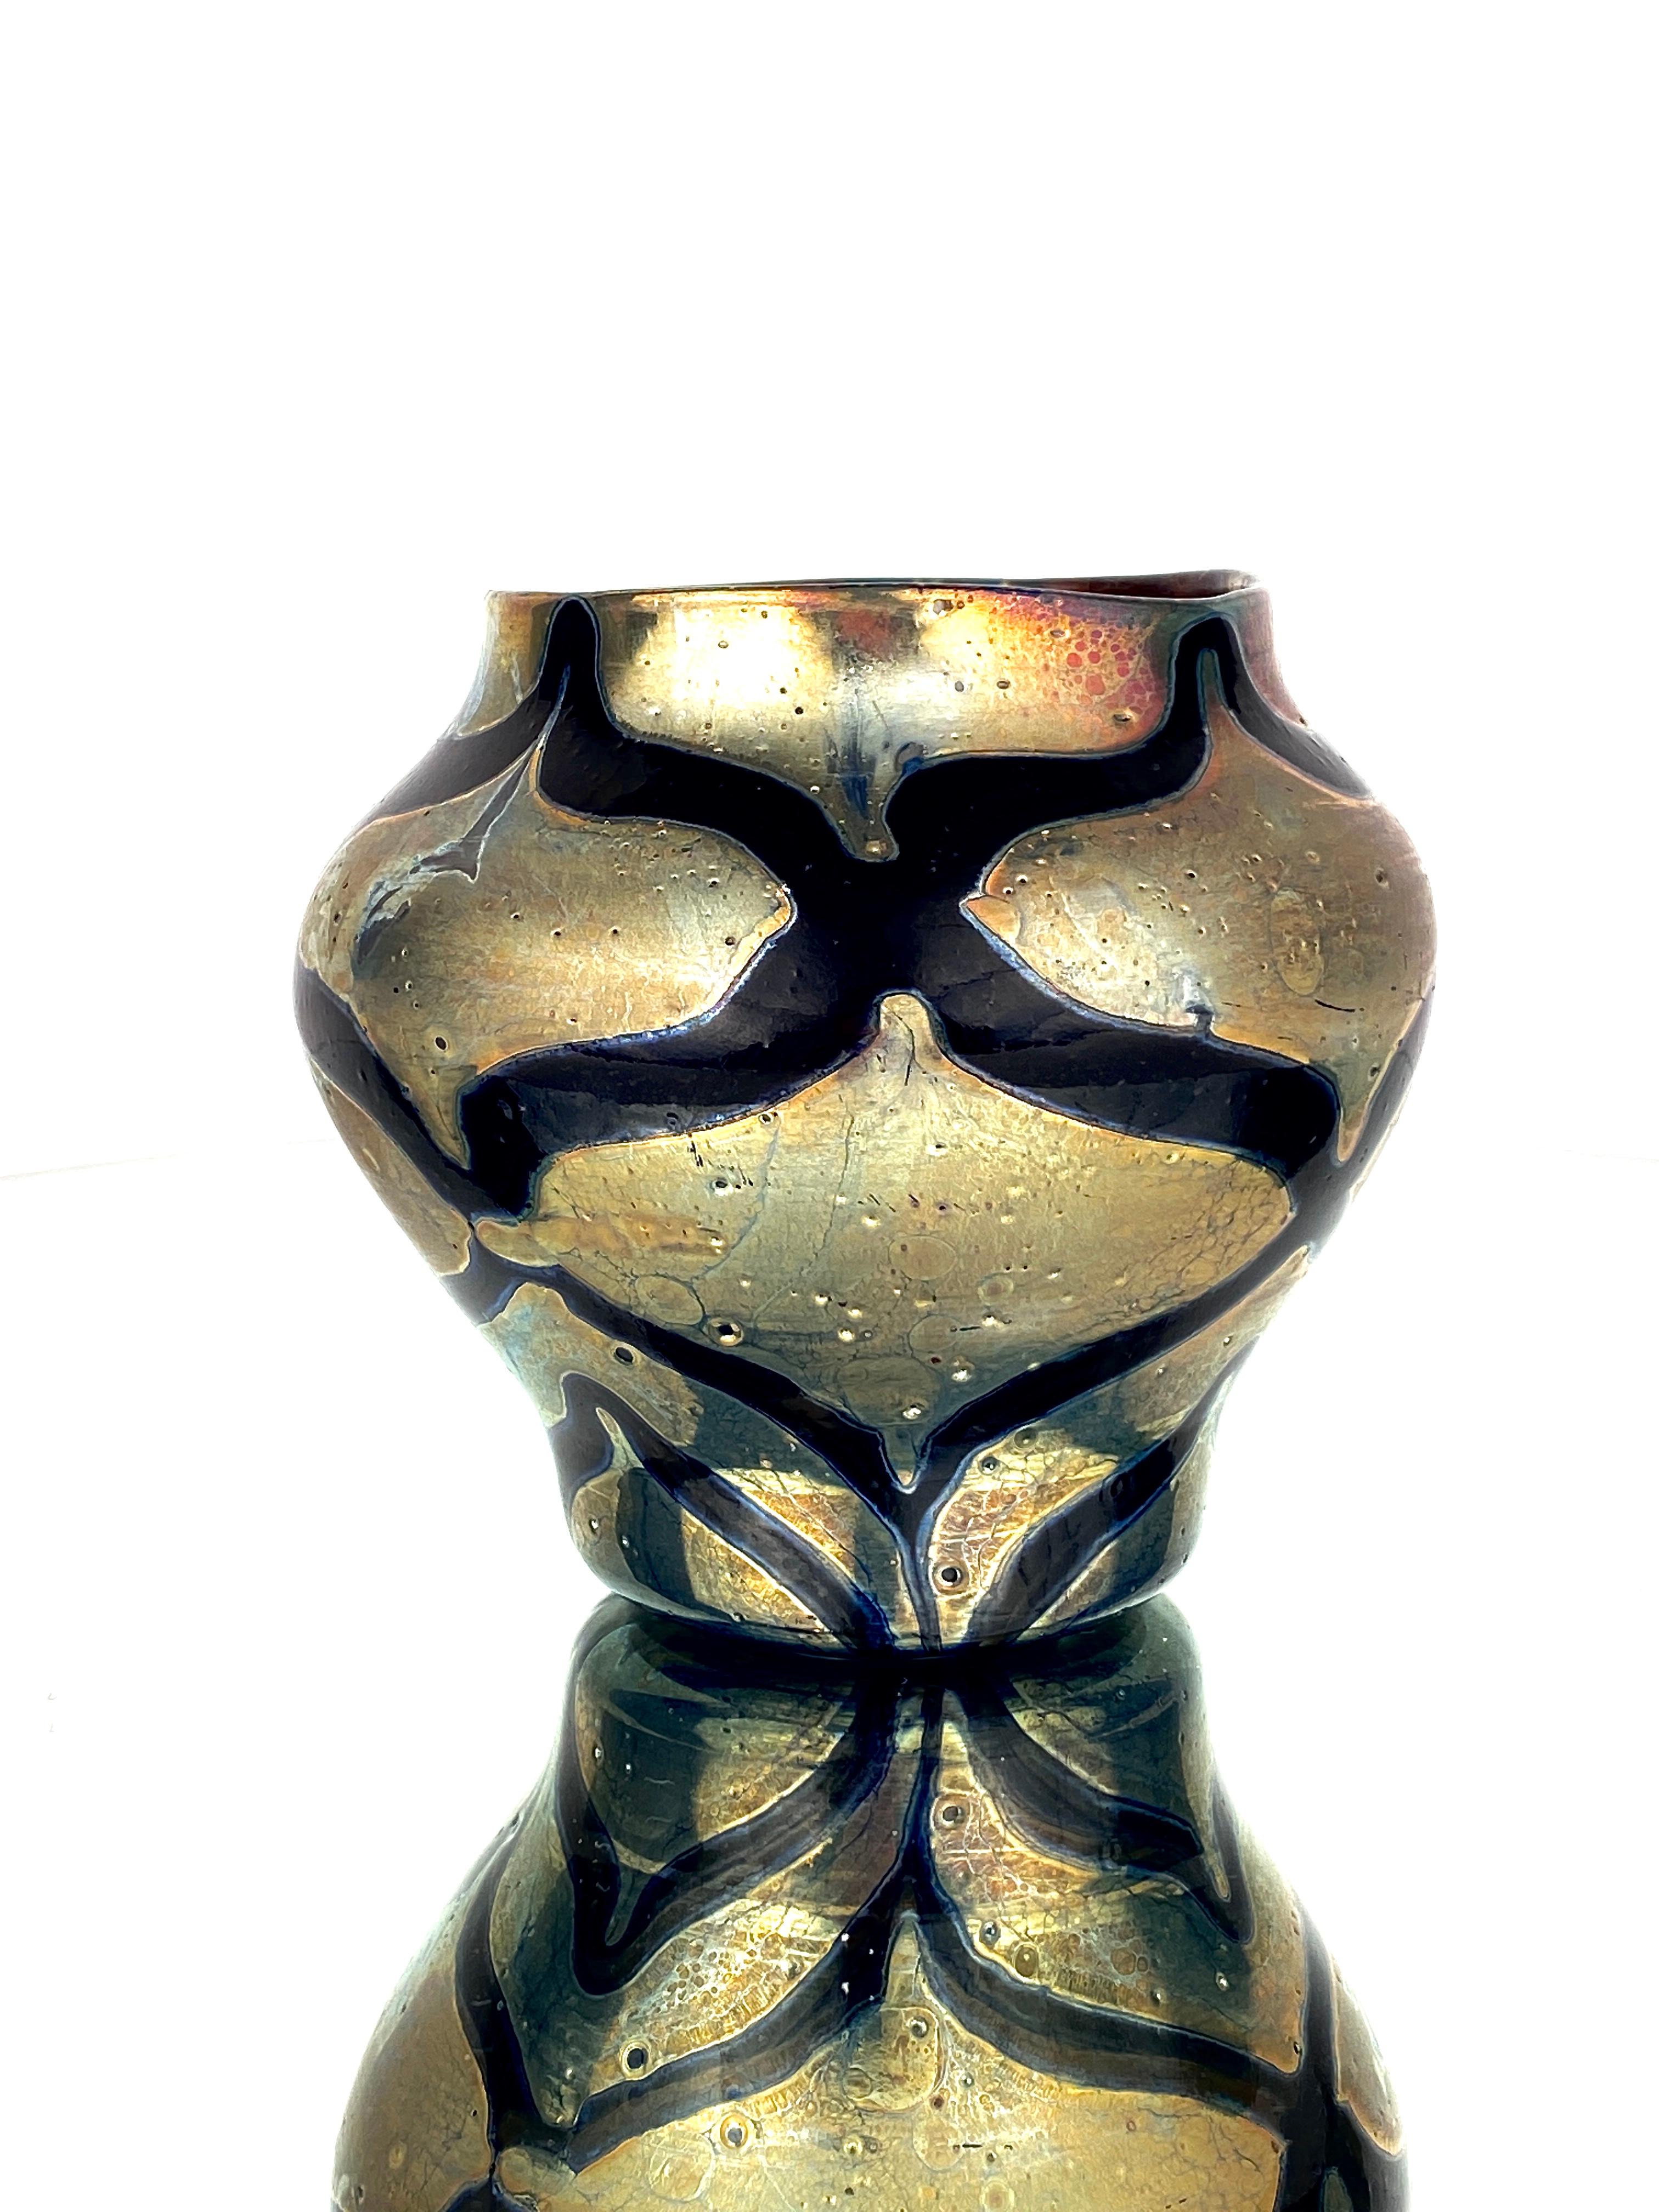 An American Art Nouveau blown glass Tiffany Favrile decorated Cypriote vase by, Tiffany Studios decorated with a black-blue iridescent zig-zag pattern against an iridescent 